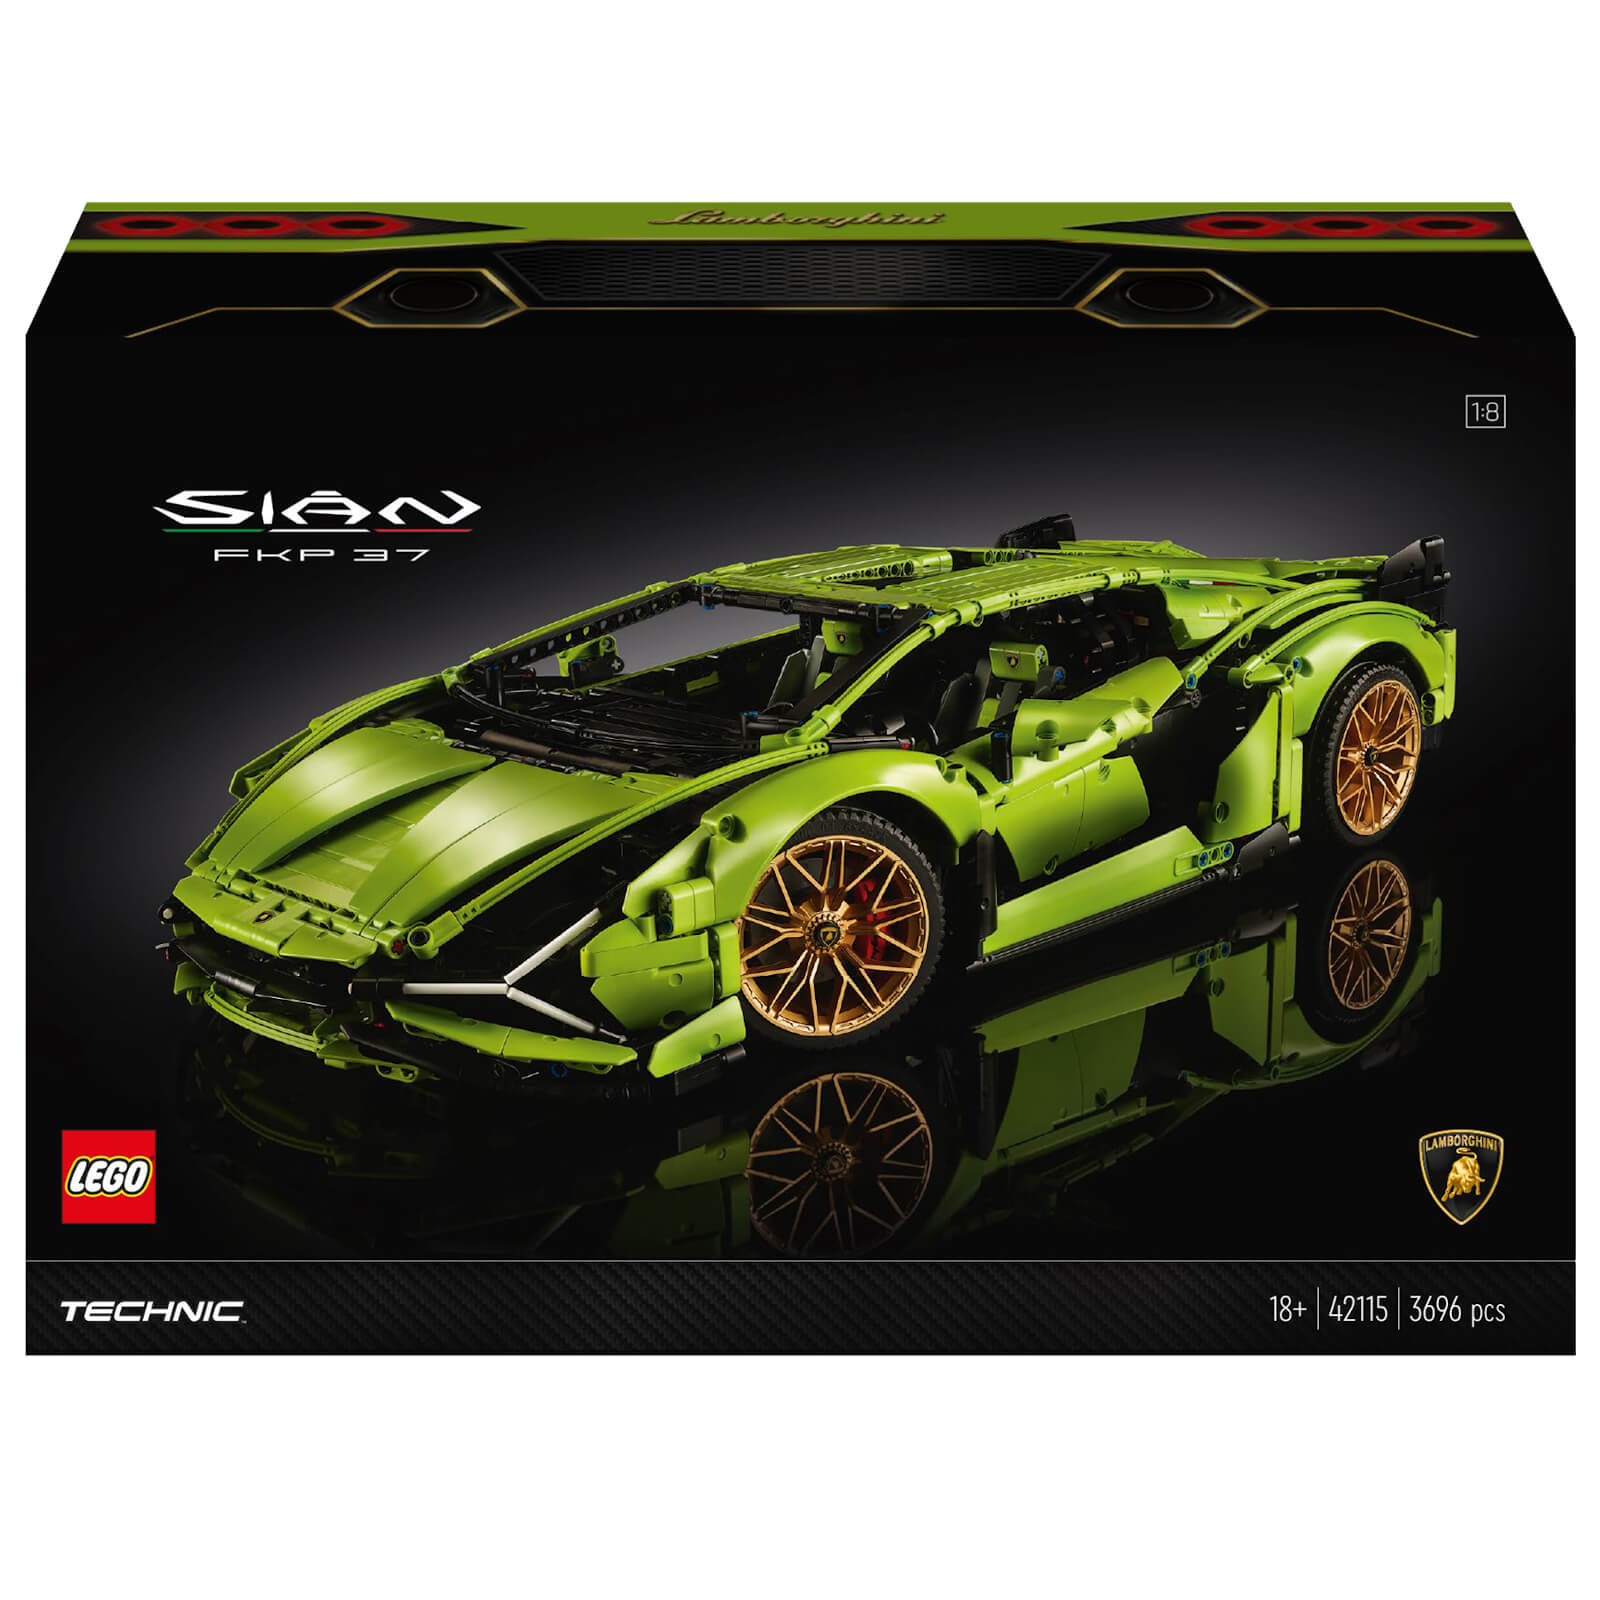 The LEGO Technic Lamborghini Sián FKP 37  A Super Sports Car that is built  piece by piece from dreams. We brought it to life with LEGO Technic in the  form of